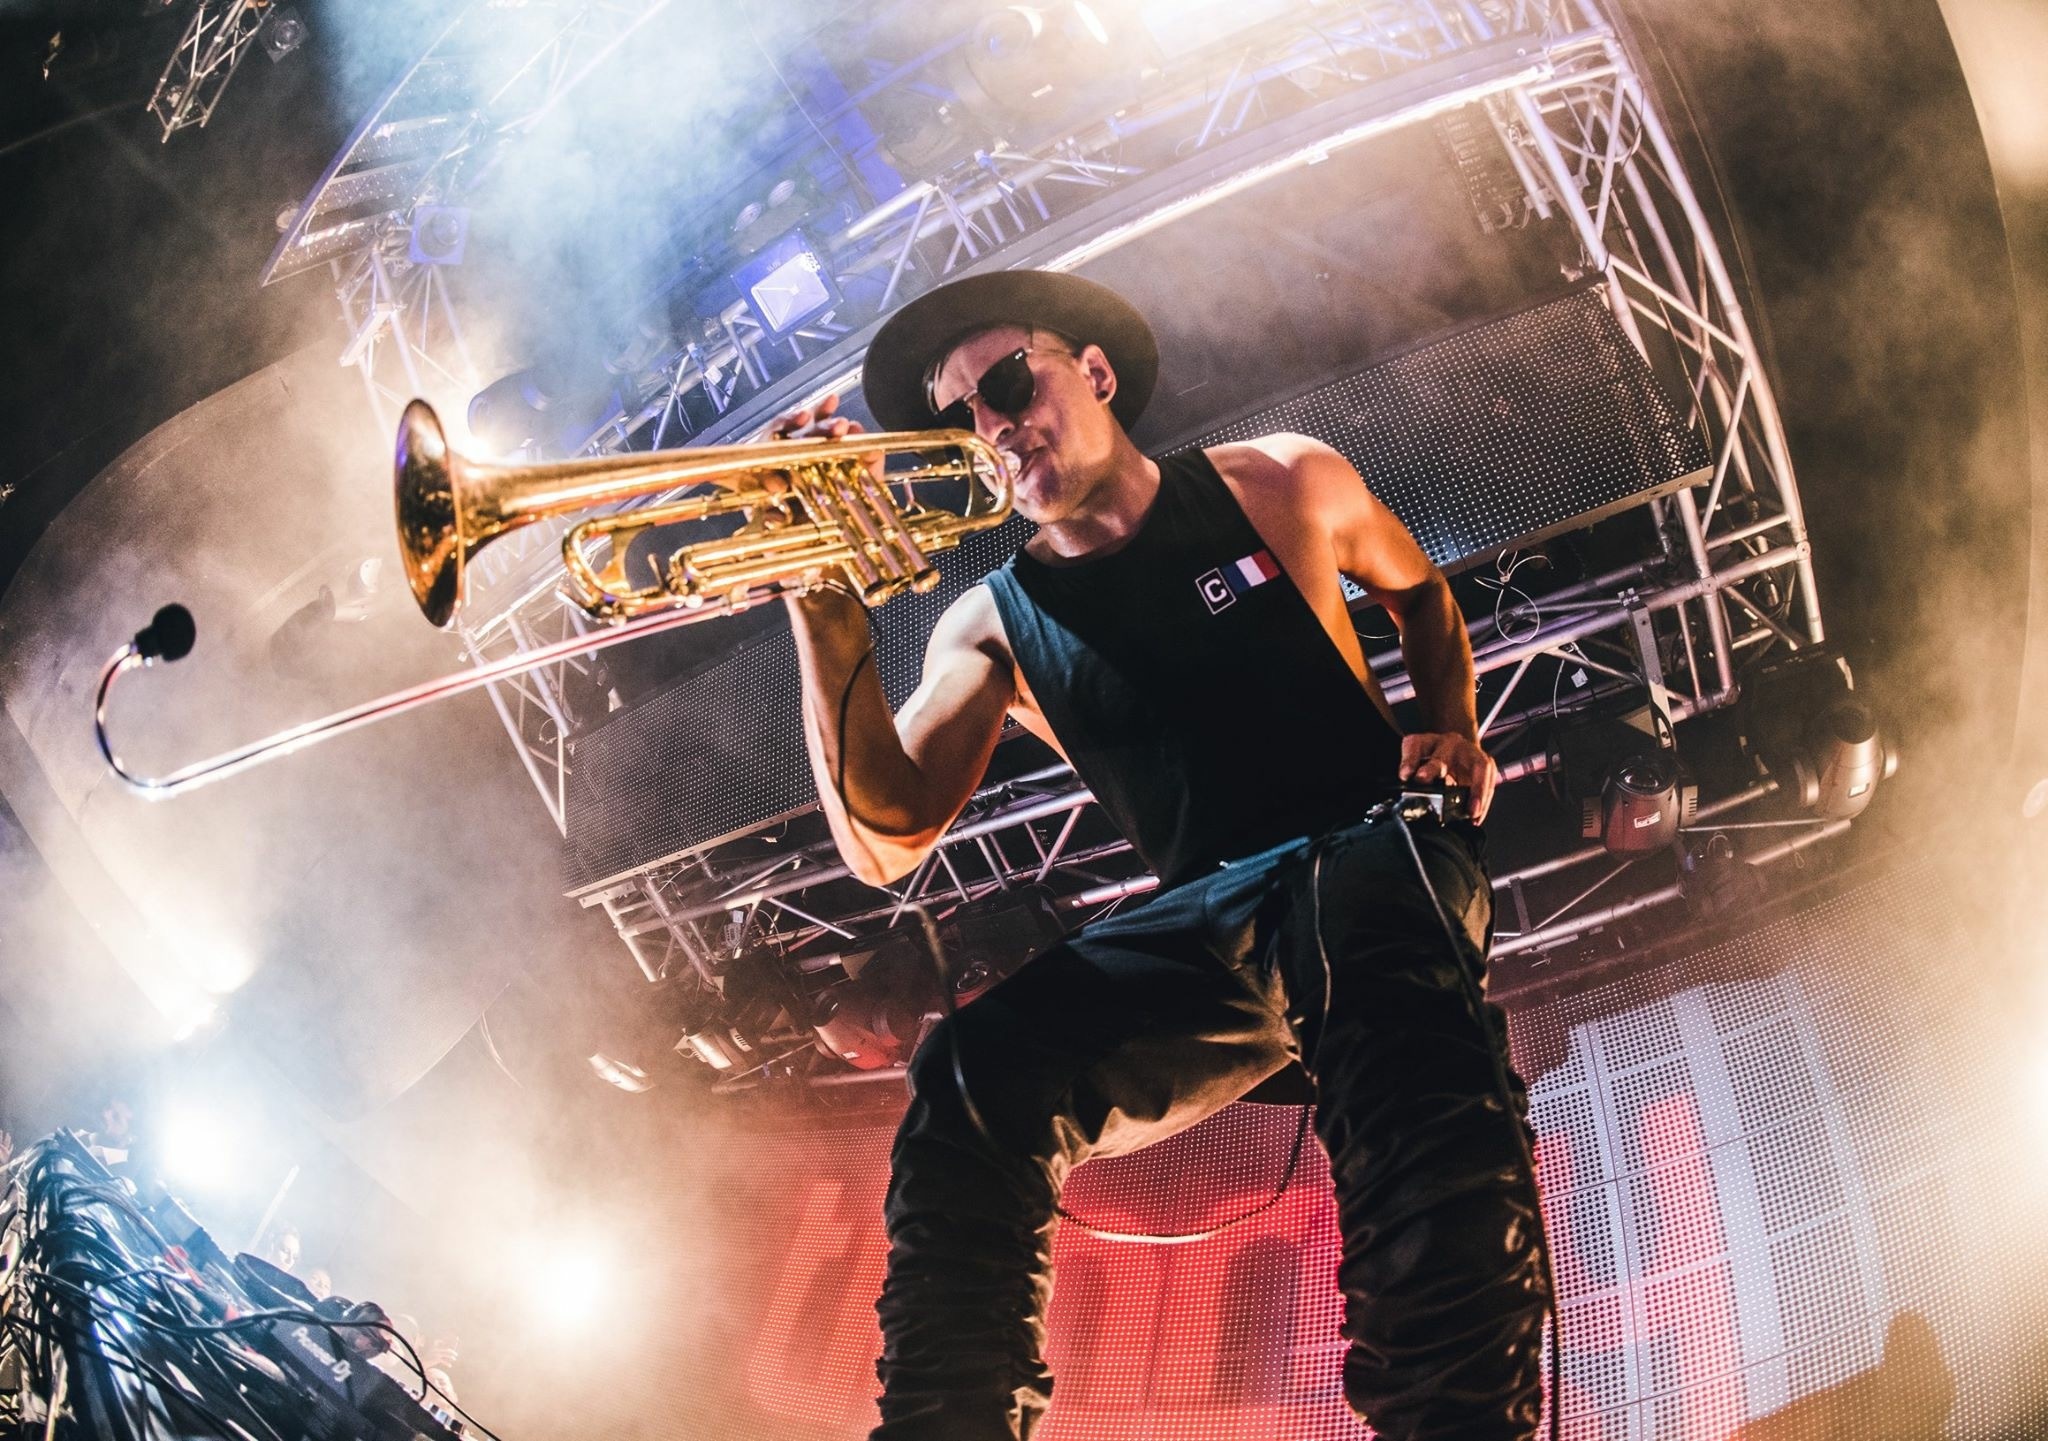 Timmy Trumpet wallpapers, High-resolution images, Mobile backgrounds, Vibrant colors, 2050x1450 HD Desktop